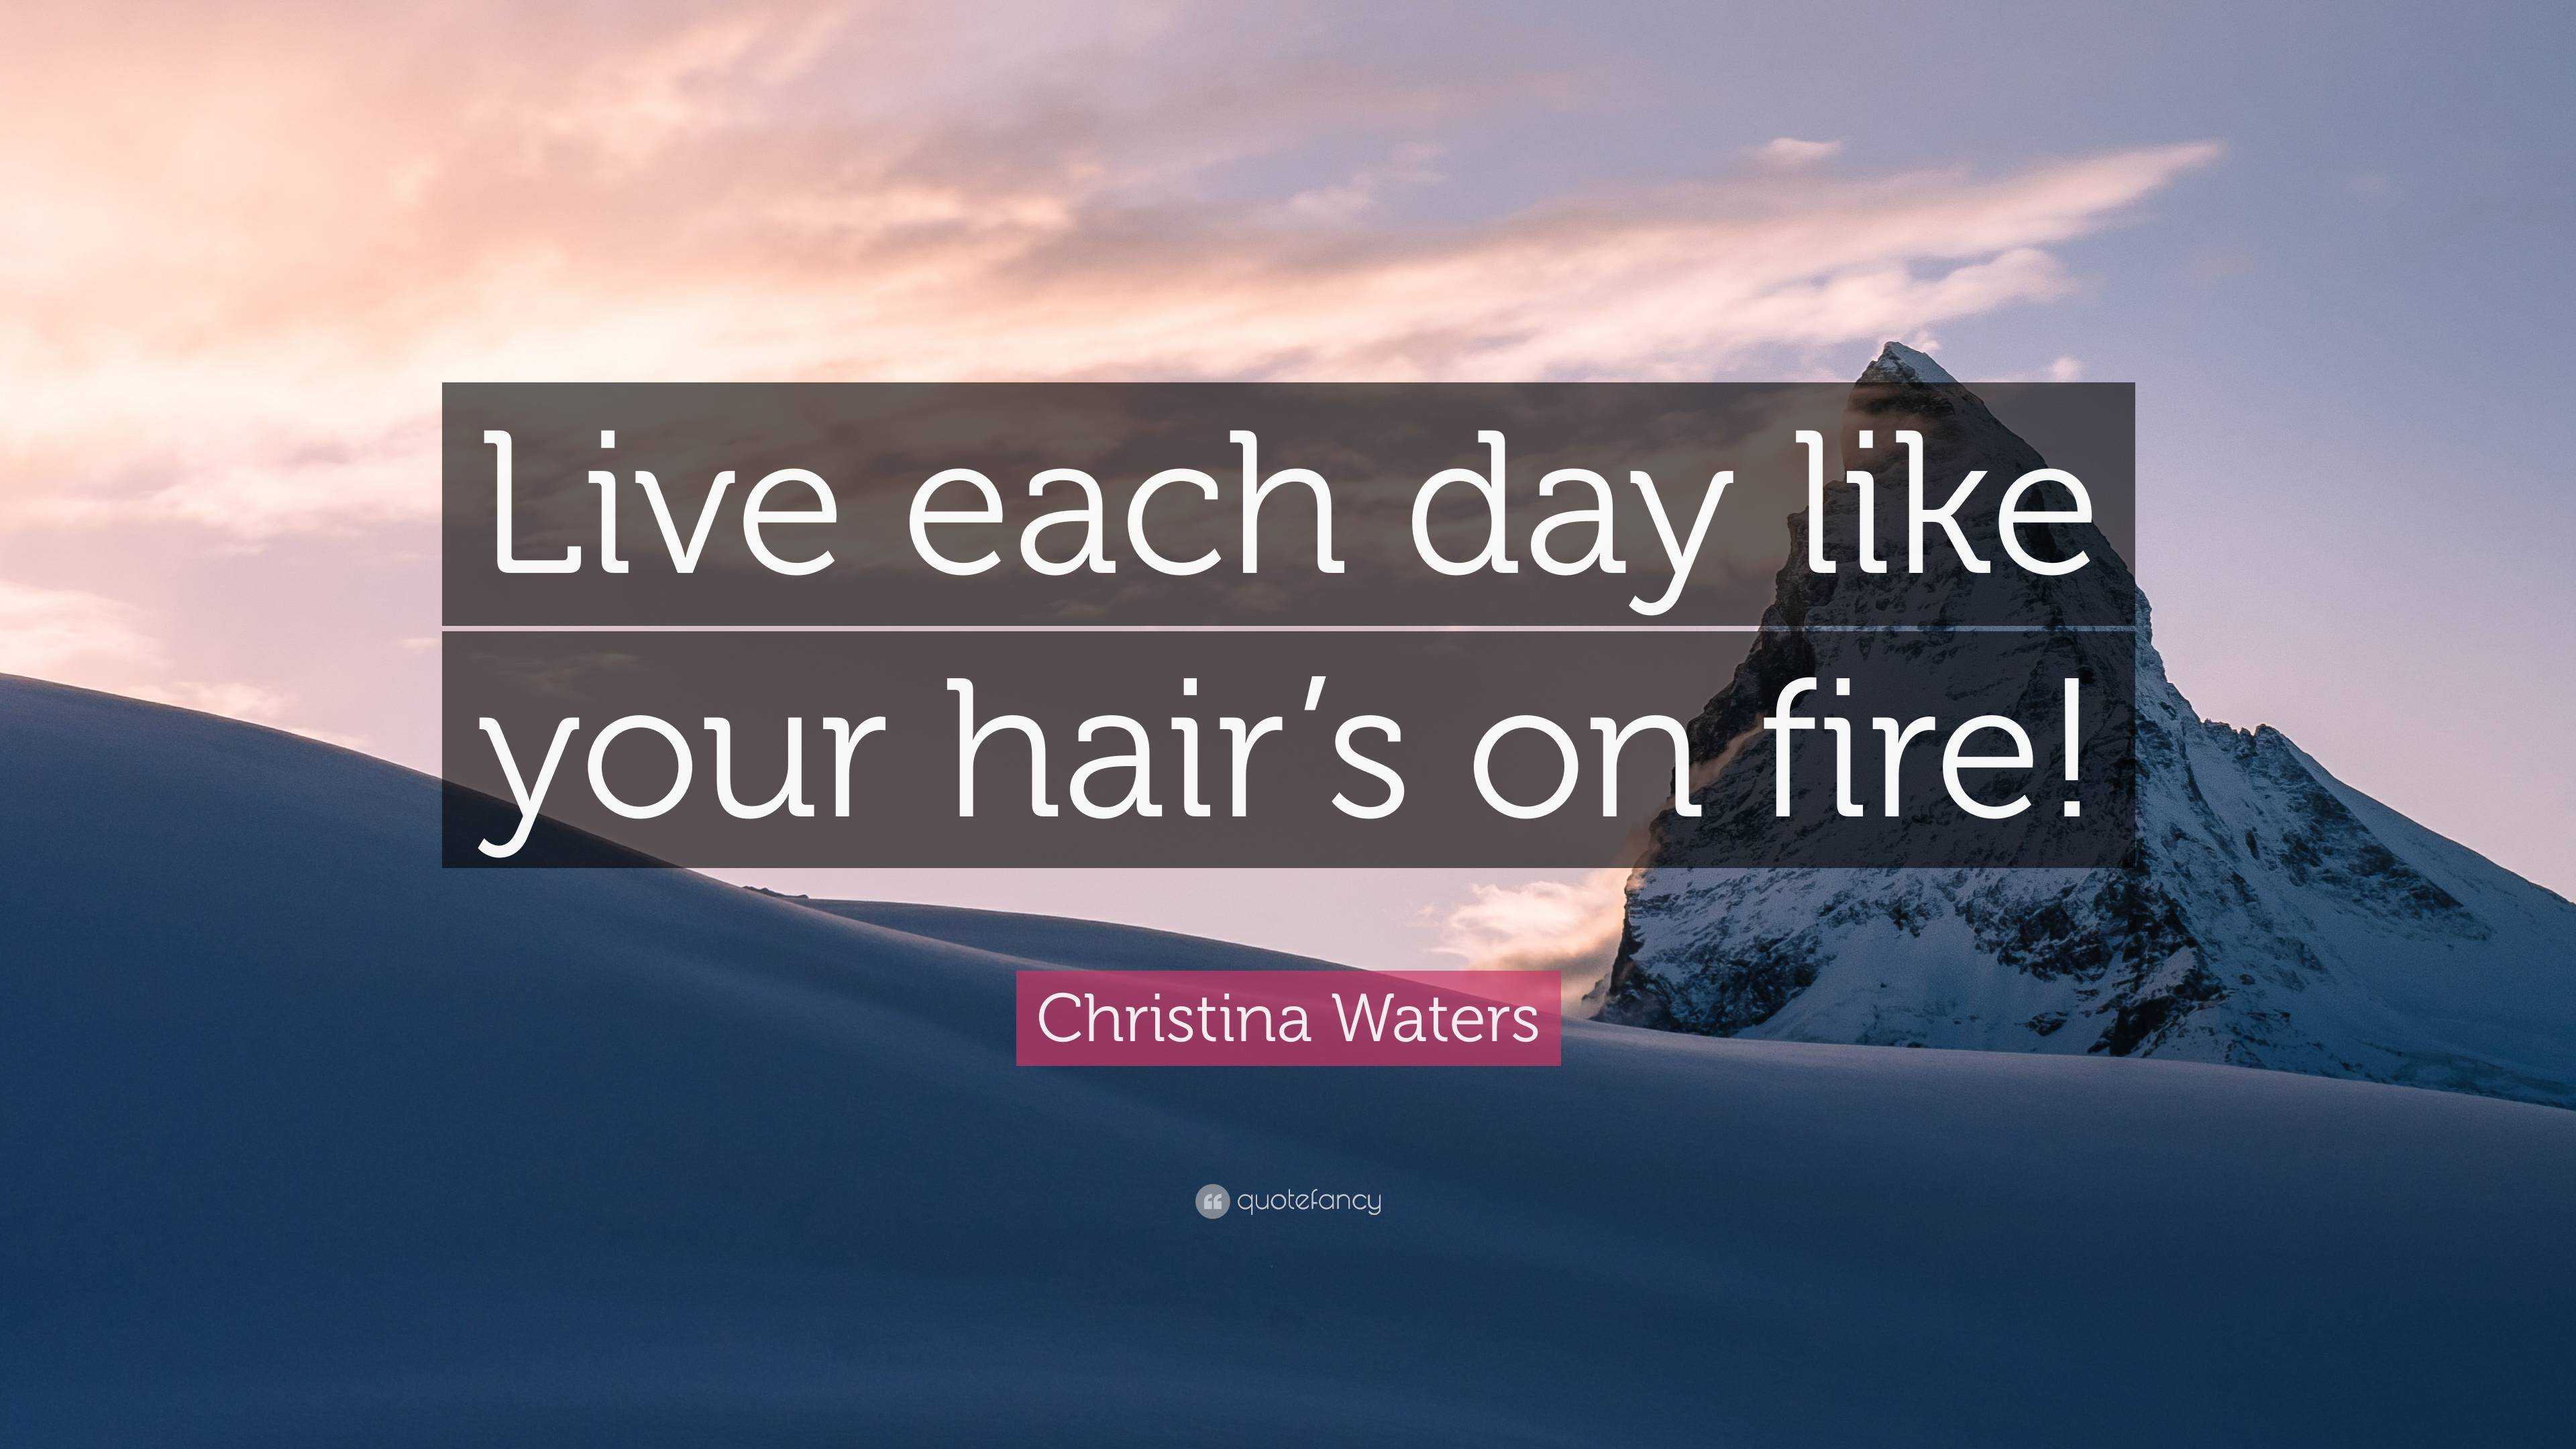 Christina Waters Quote: “Live each day like your hair's on fire!”